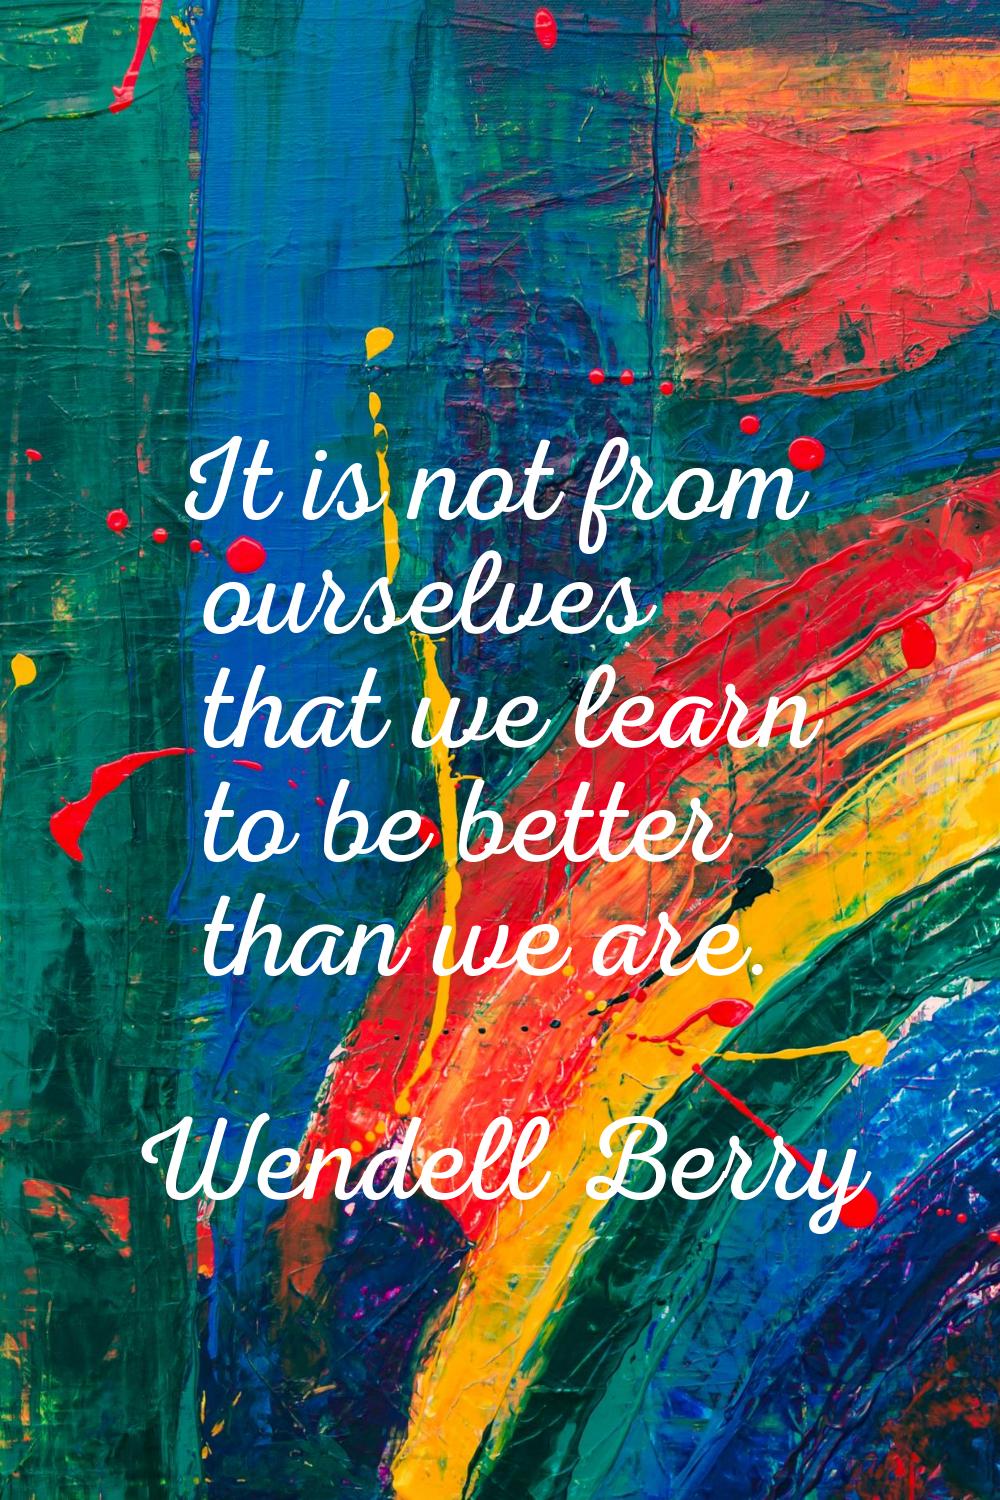 It is not from ourselves that we learn to be better than we are.